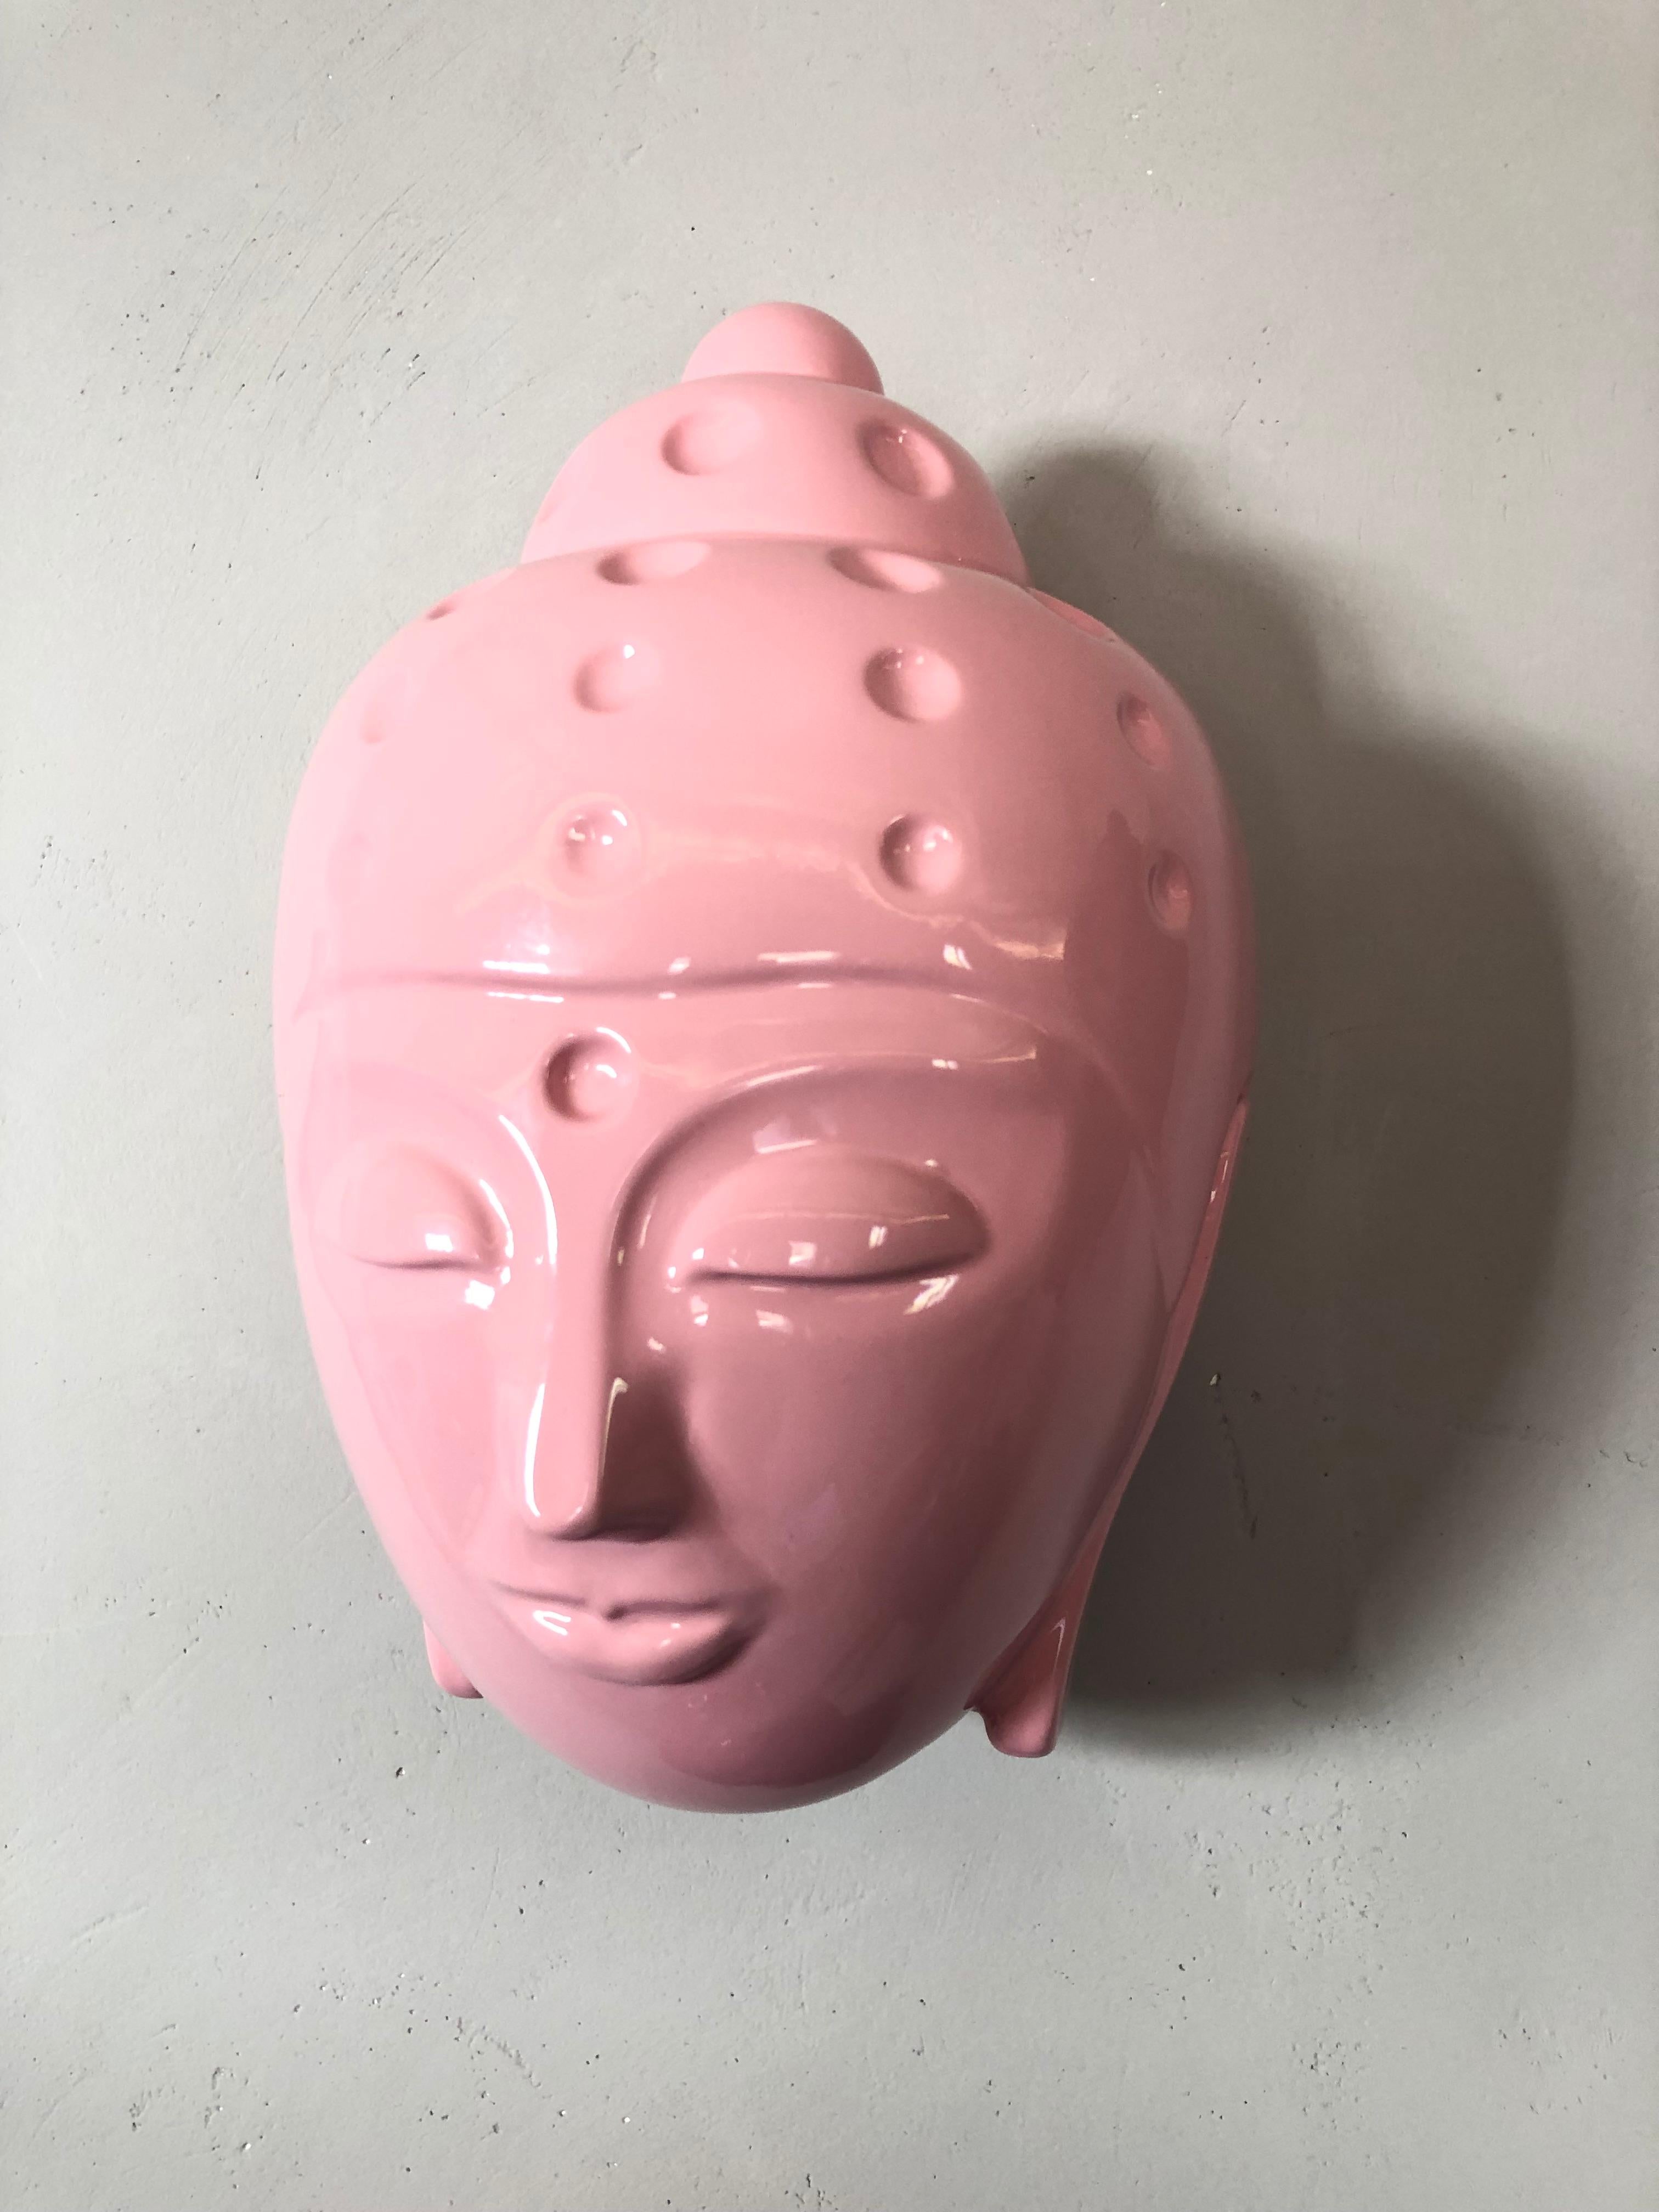 Contemporary buddha head figurative sculpture - painted in pink car paint - Gray Figurative Sculpture by Tal Nehoray